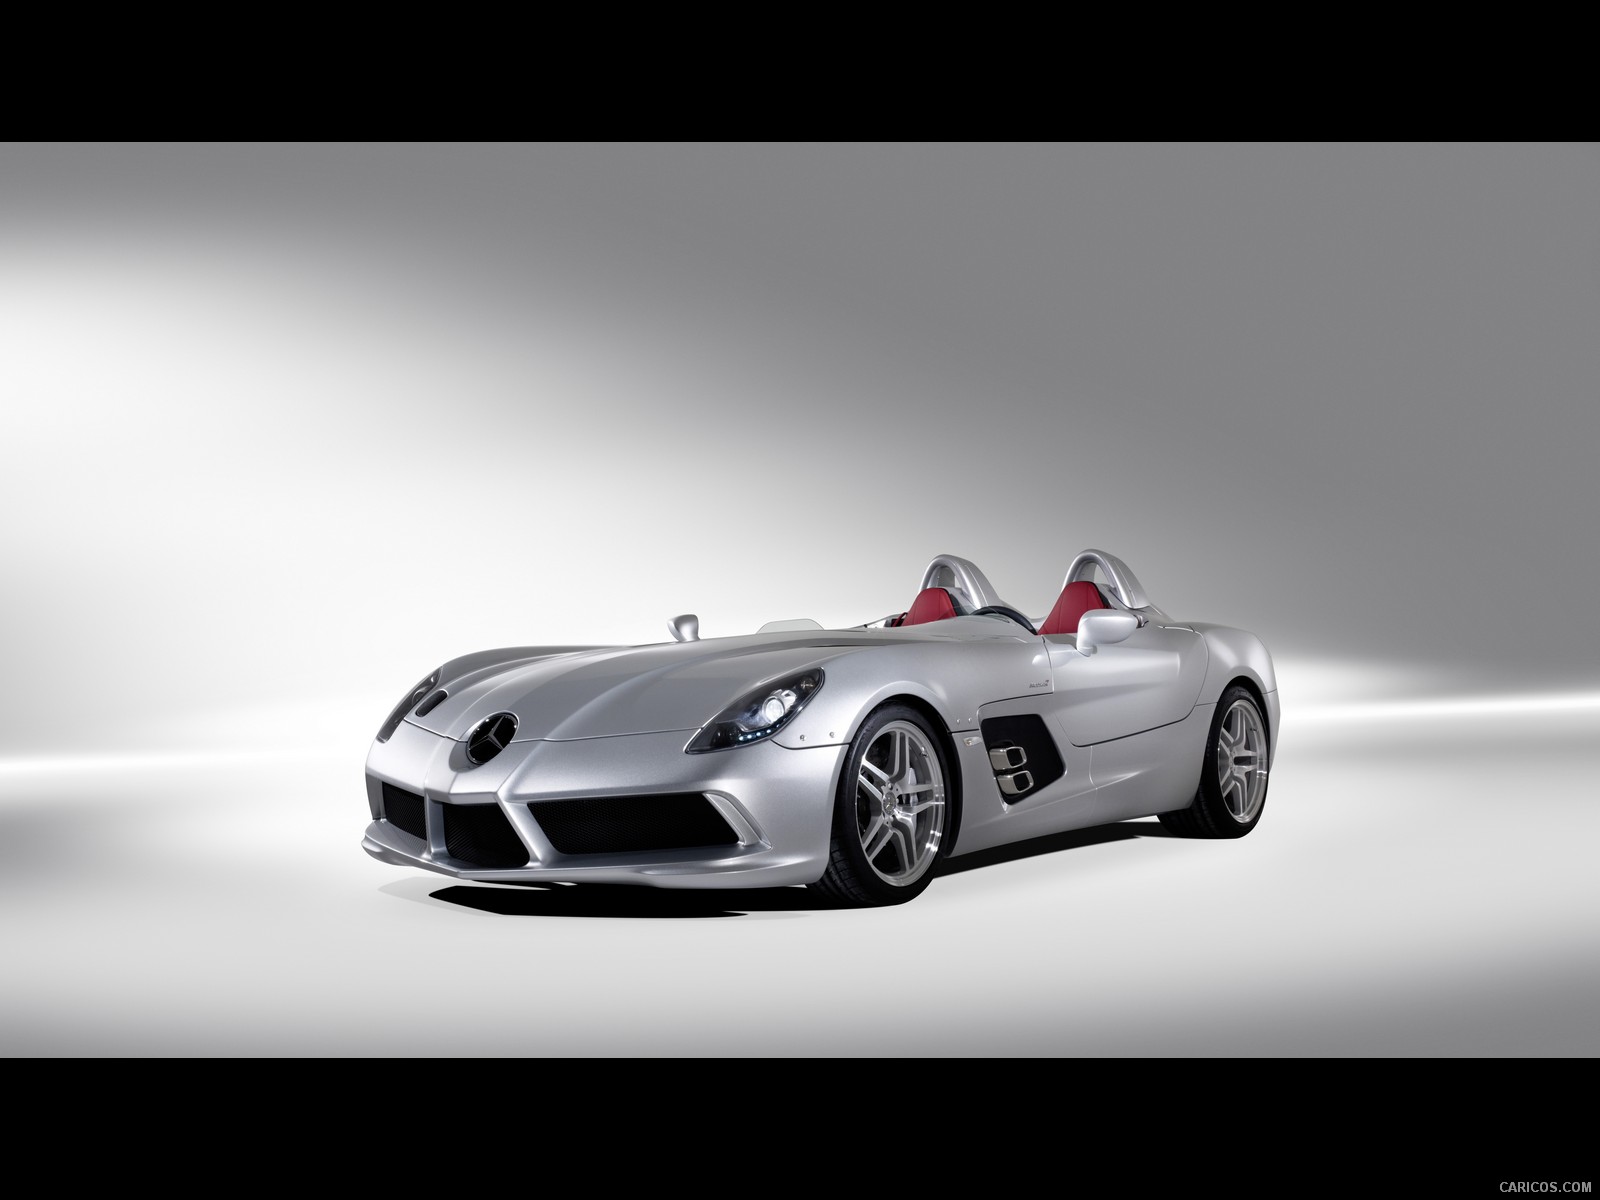 Mercedes-Benz SLR Stirling Moss  - Front Angle , #34 of 54